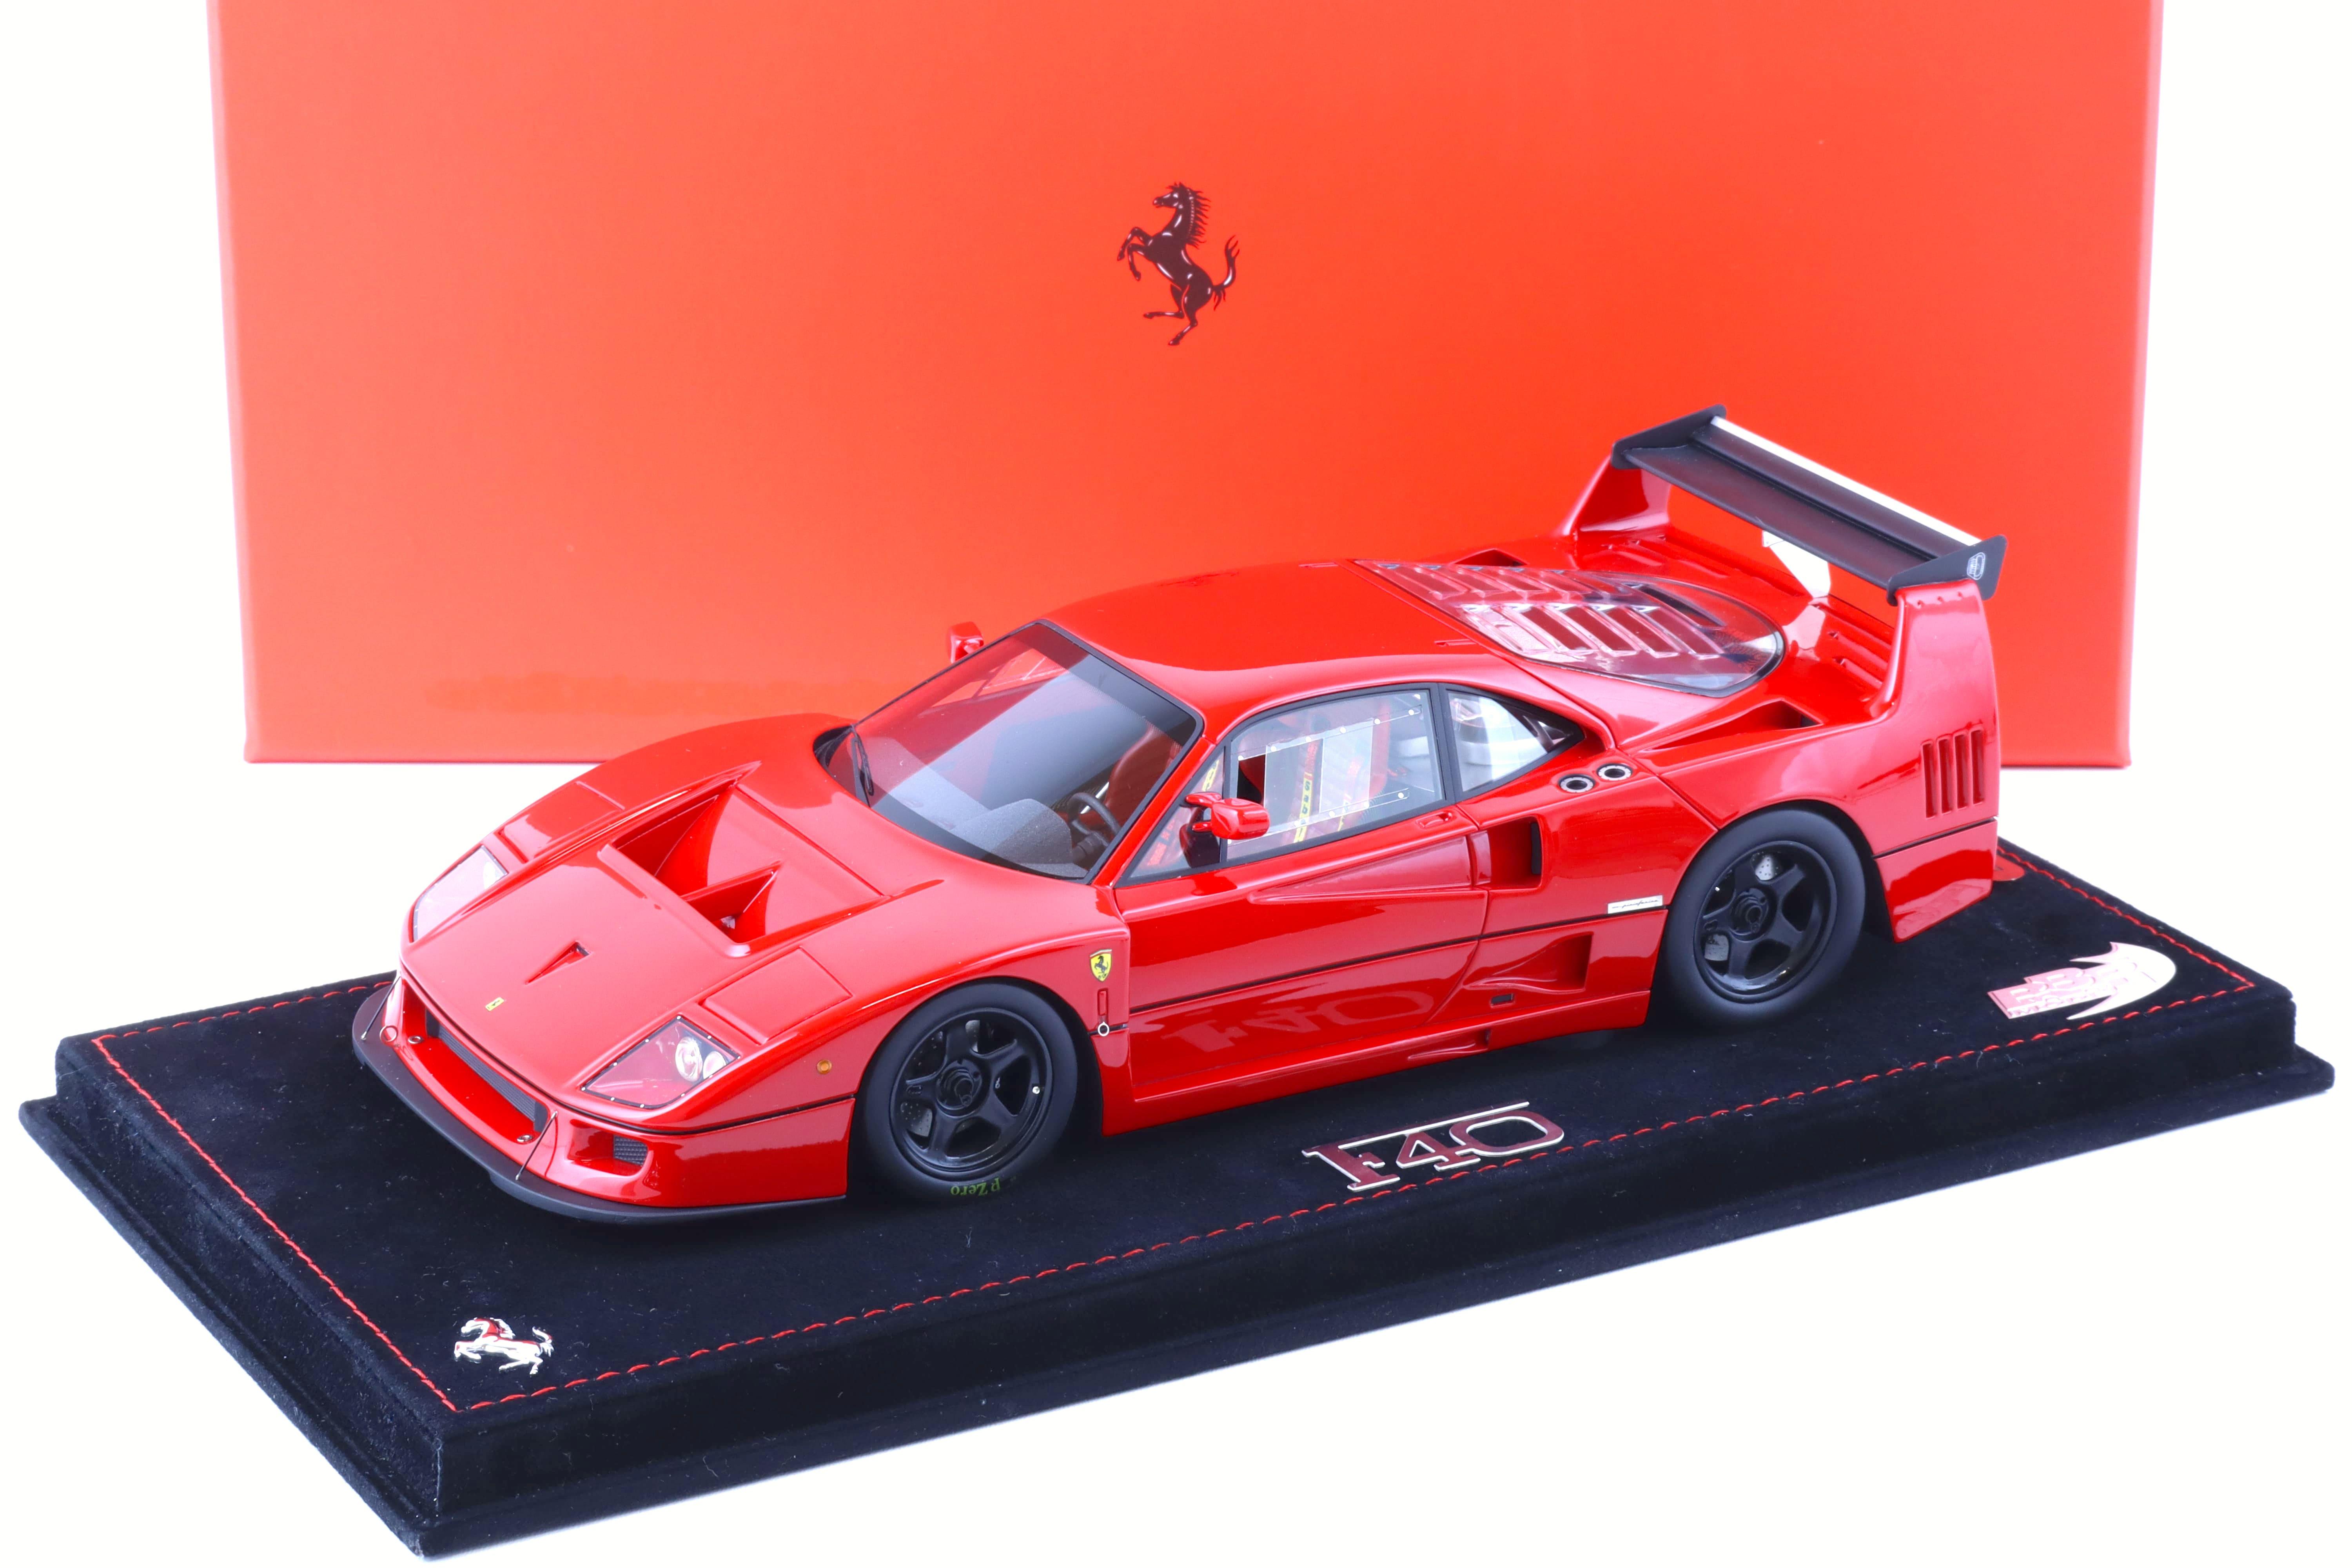 1:18 BBR Ferrari F40 LM Rosso Corsa 322 red with display - Limited Edition 200 pcs.